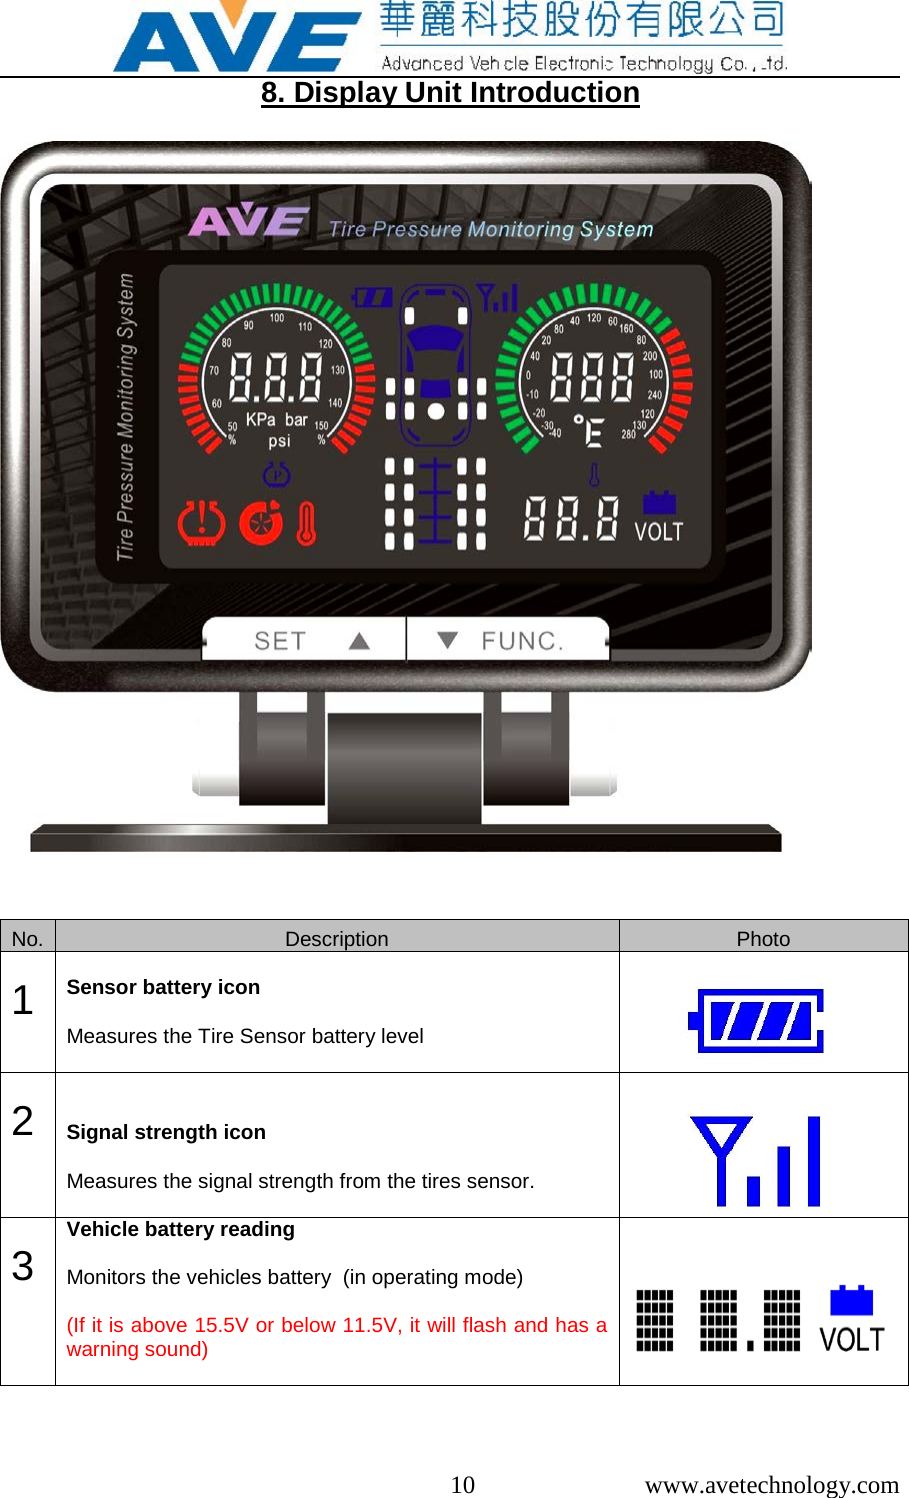  10  www.avetechnology.com 8. Display Unit Introduction     No. Description Photo  1   Sensor battery icon  Measures the Tire Sensor battery level    2    Signal strength icon  Measures the signal strength from the tires sensor.    3     Vehicle battery reading  Monitors the vehicles battery  (in operating mode)  (If it is above 15.5V or below 11.5V, it will flash and has a warning sound)     